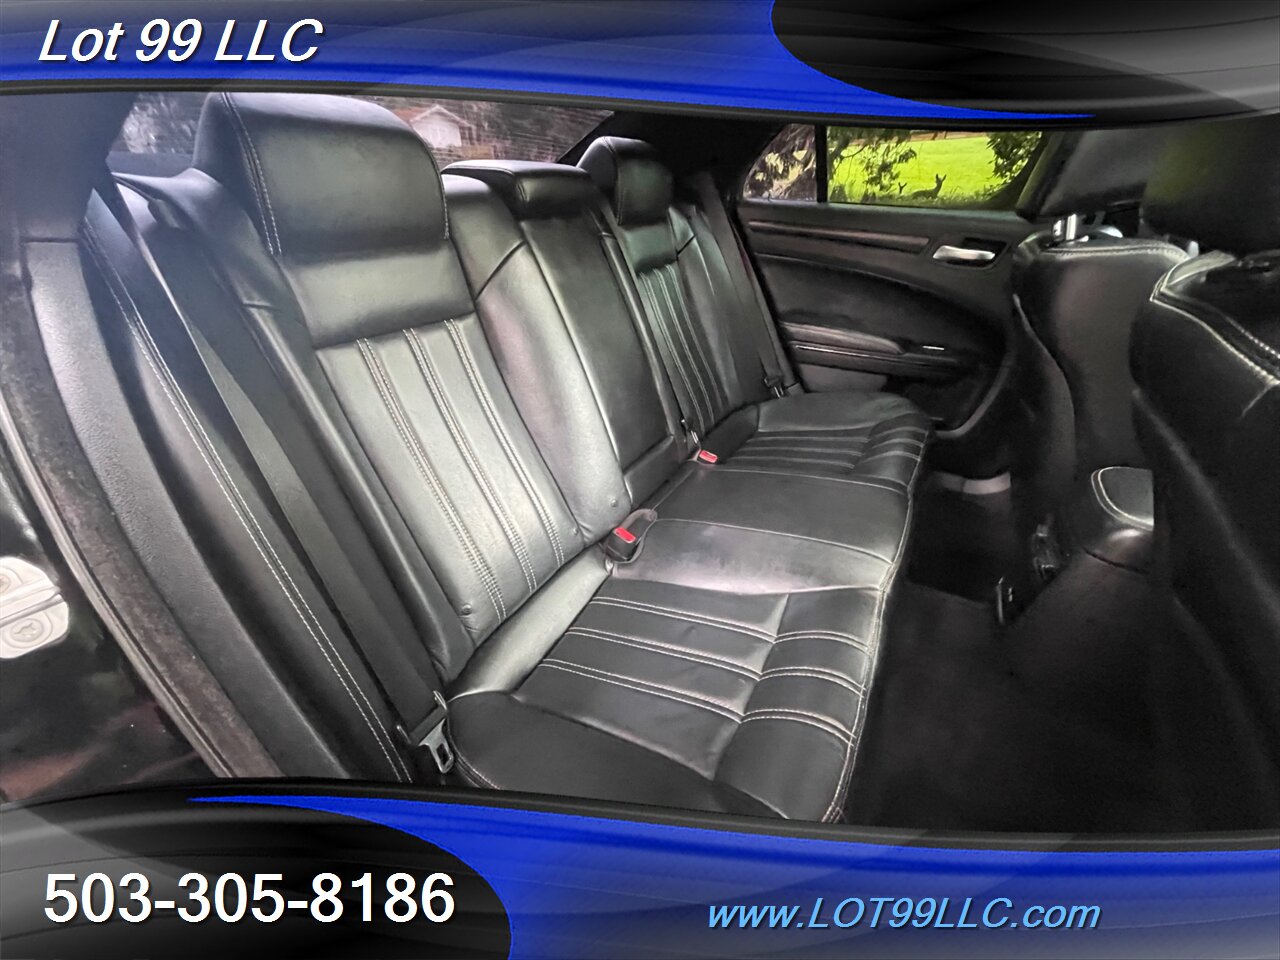 2015 Chrysler 300 Series S Only 86k Miles  Navi Pano HTD Leather 31MPG   - Photo 19 - Milwaukie, OR 97267